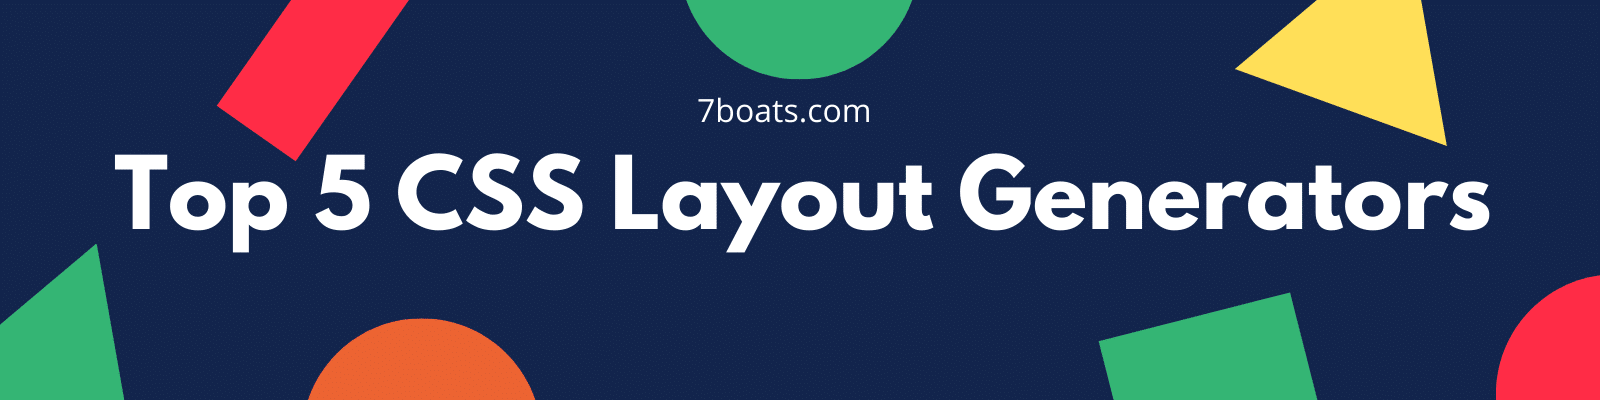 top 5 css layout generator tools 7boats